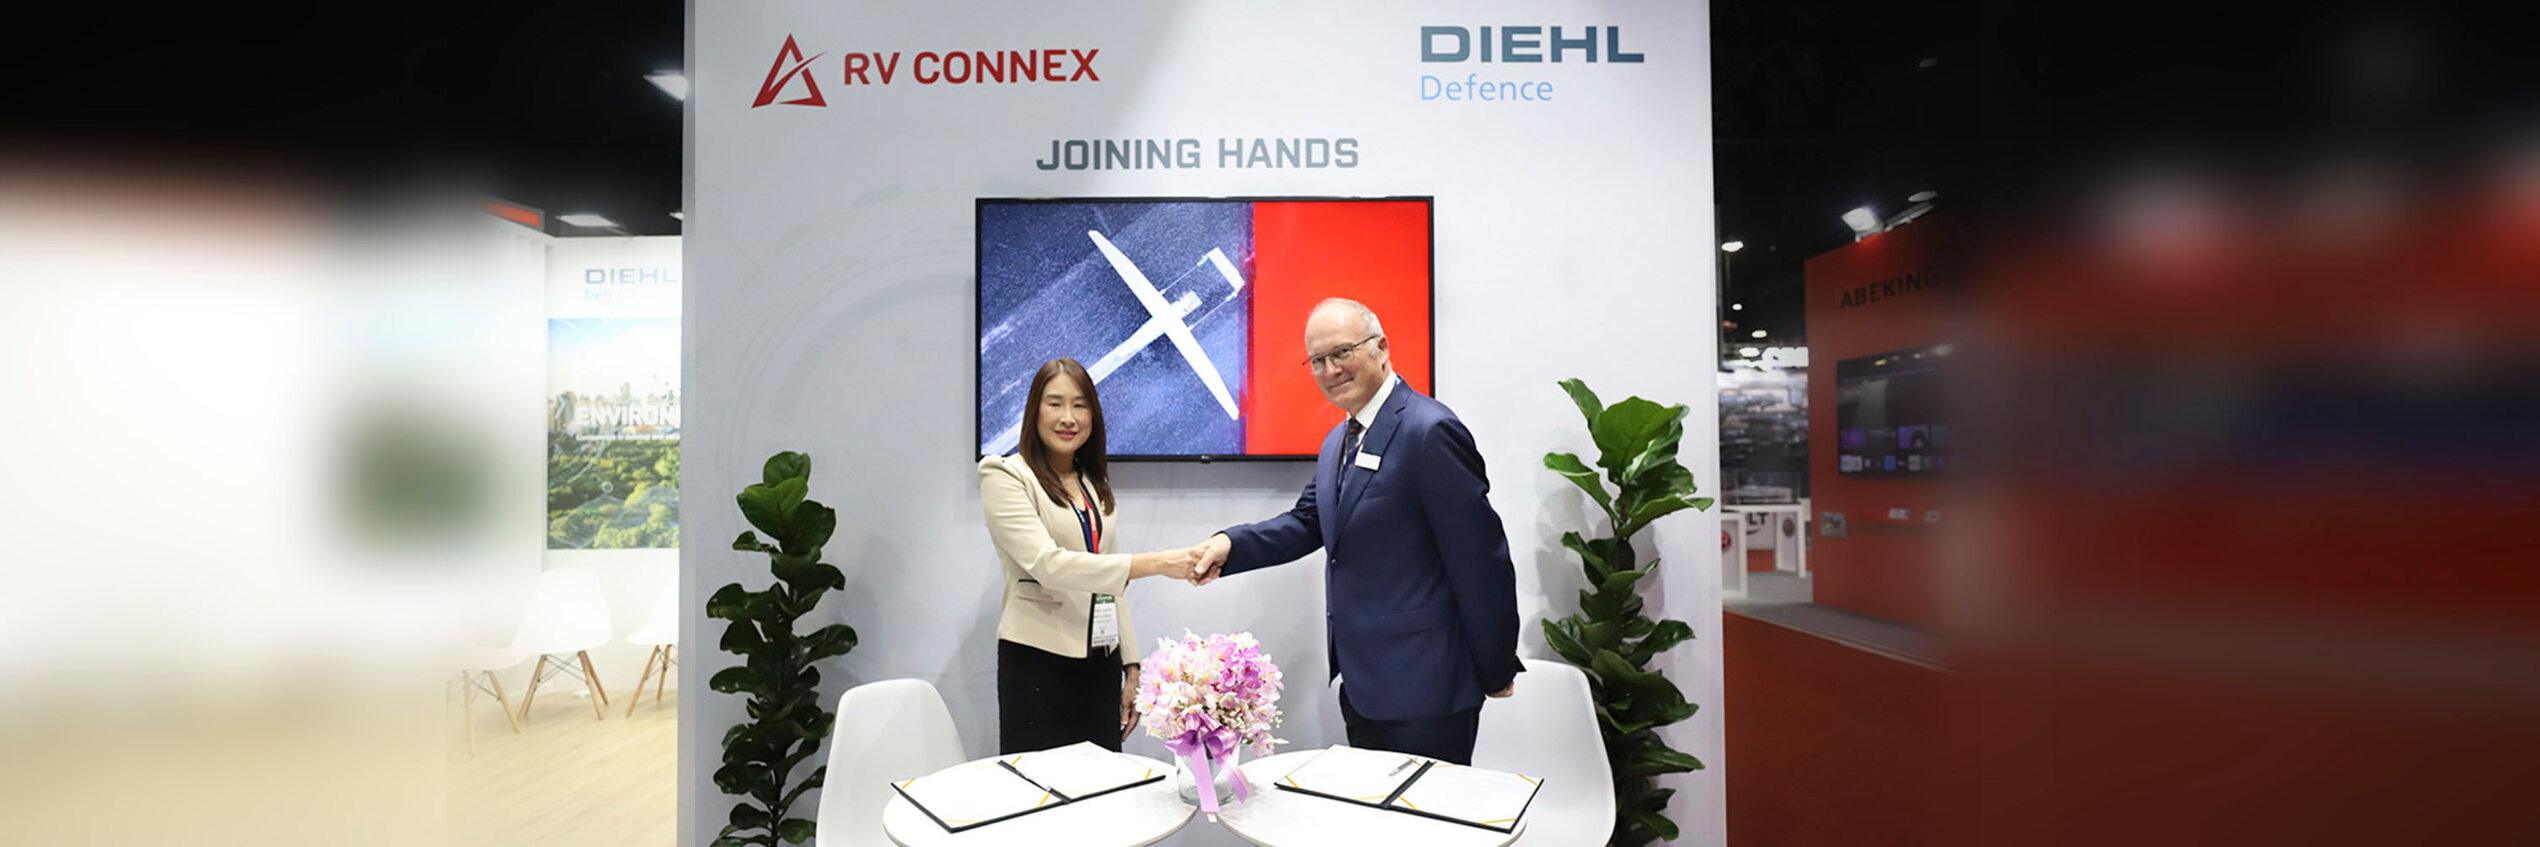 Diehl Defence and RV Connex announce intention to found future cooperation